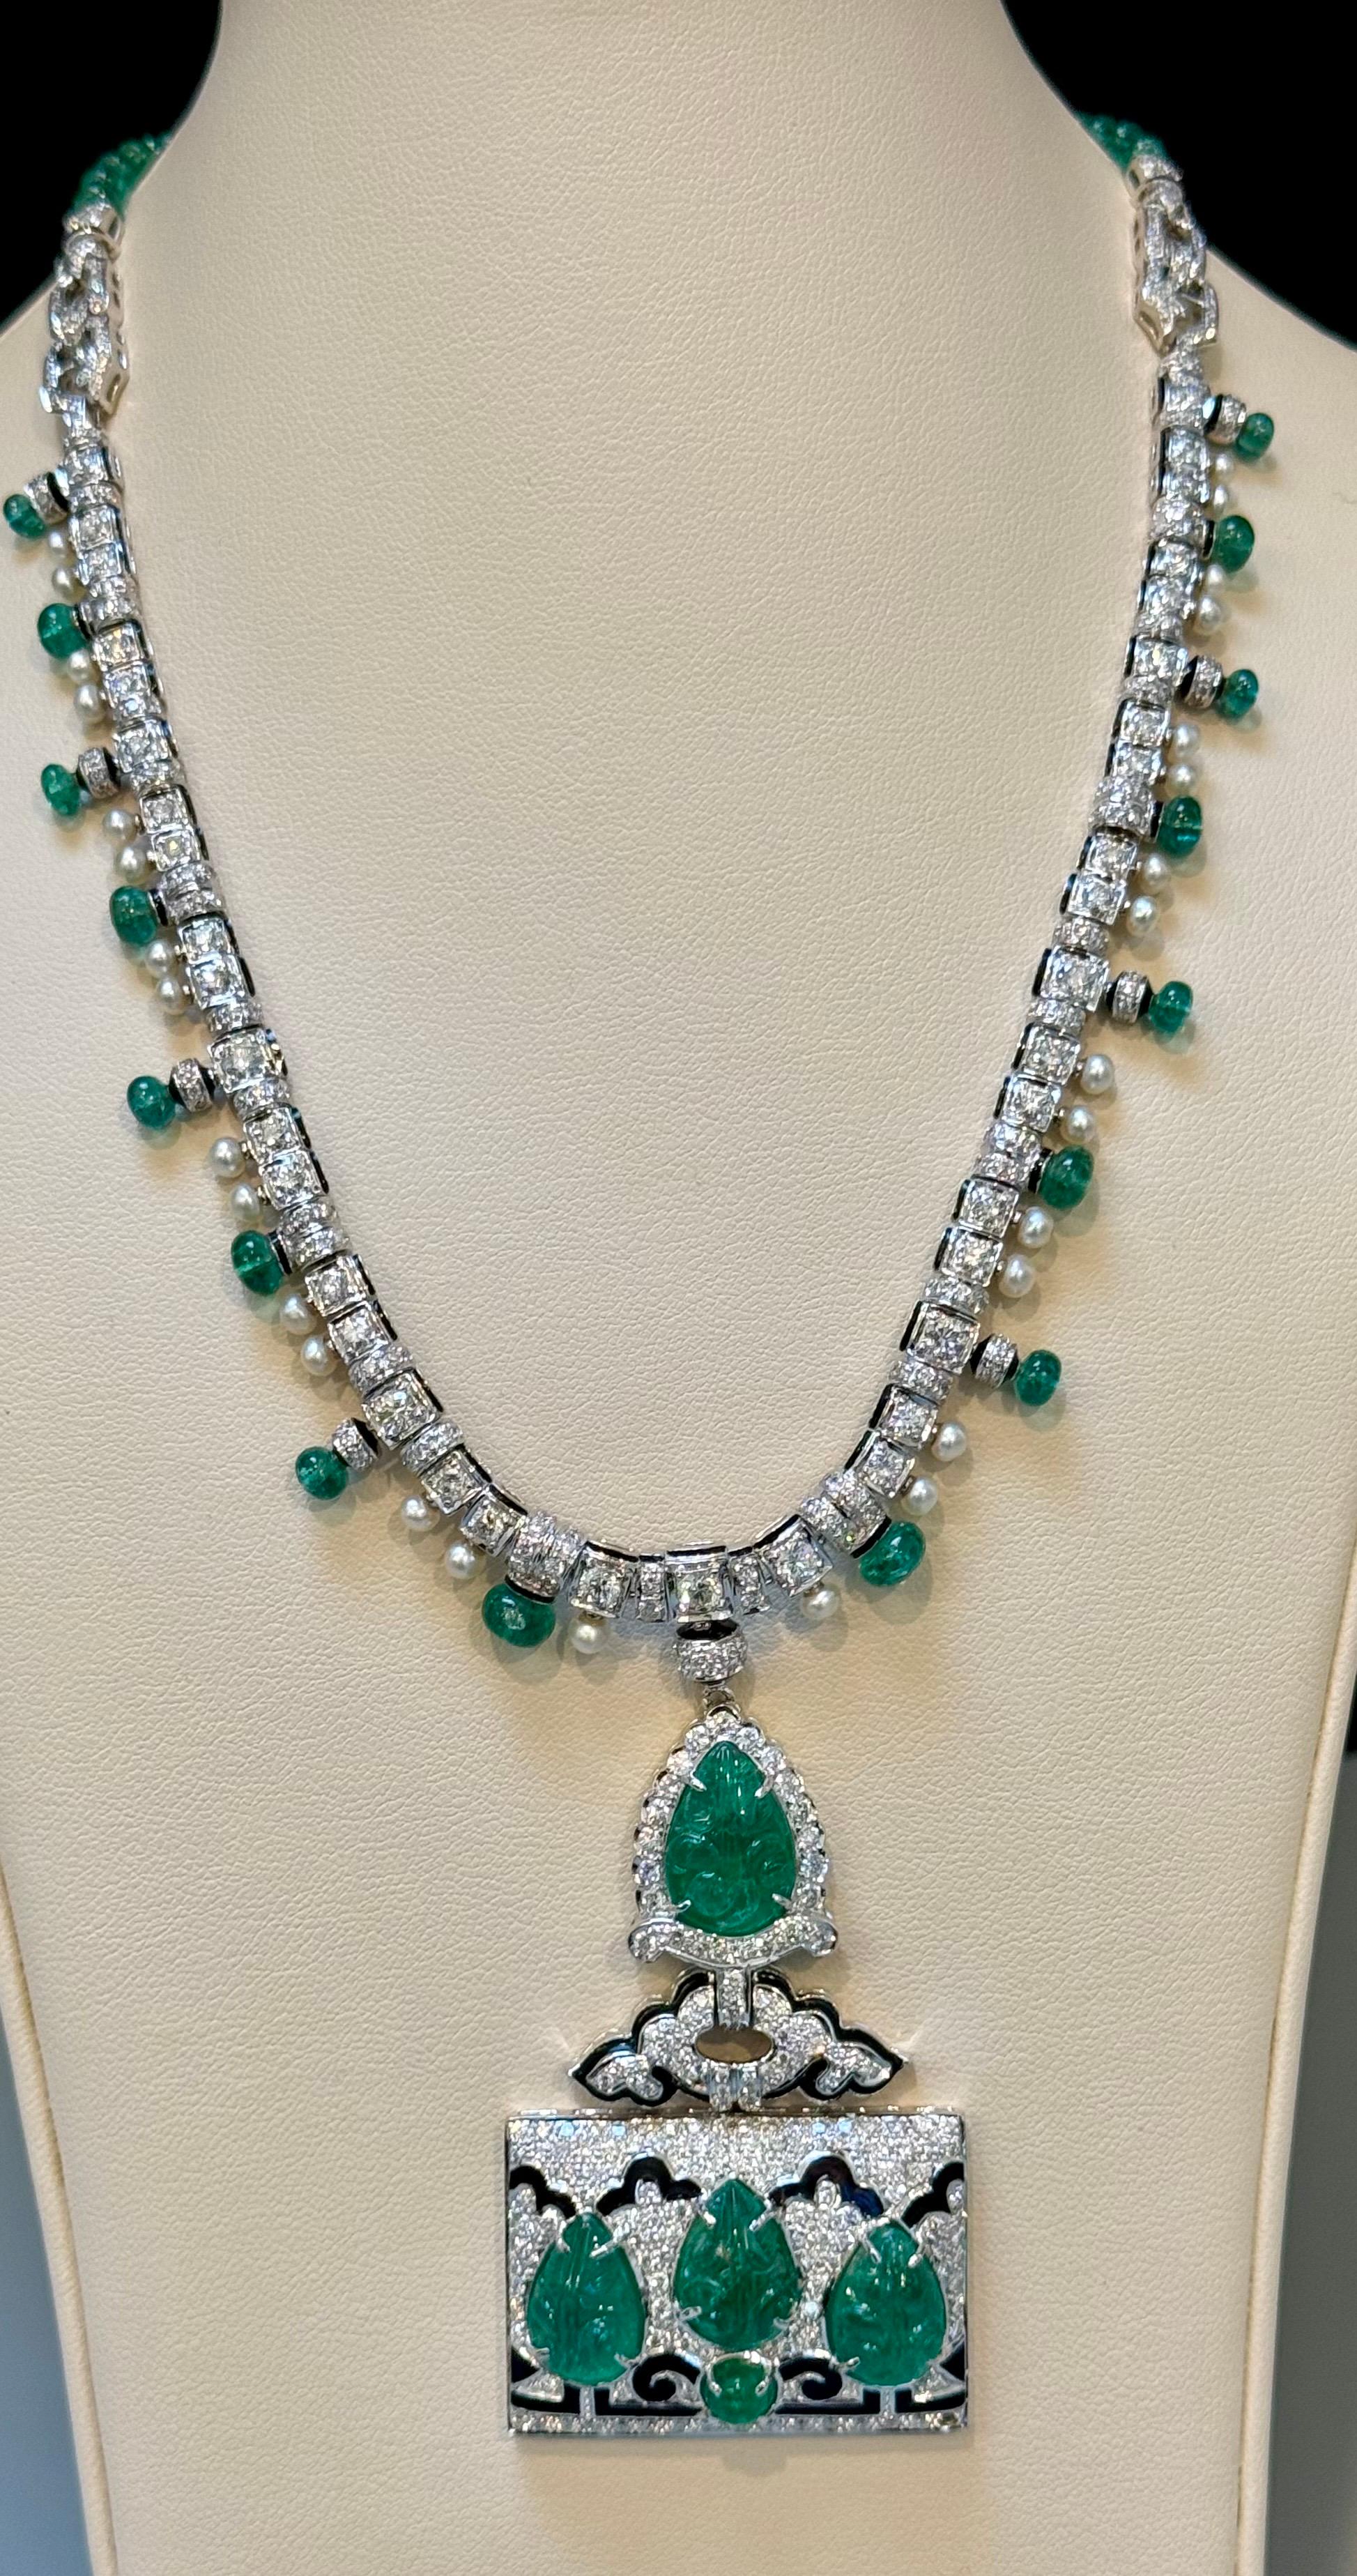 Approximately 25 Ct Natural Carved leaves Emerald & 10 Ct Diamond Art Deco 18 Karat White Gold Necklace with Emerald Beads
This exquisite necklace boasts a harmonious blend of natural carved emeralds, weighing around 25 carats, and dazzling diamonds